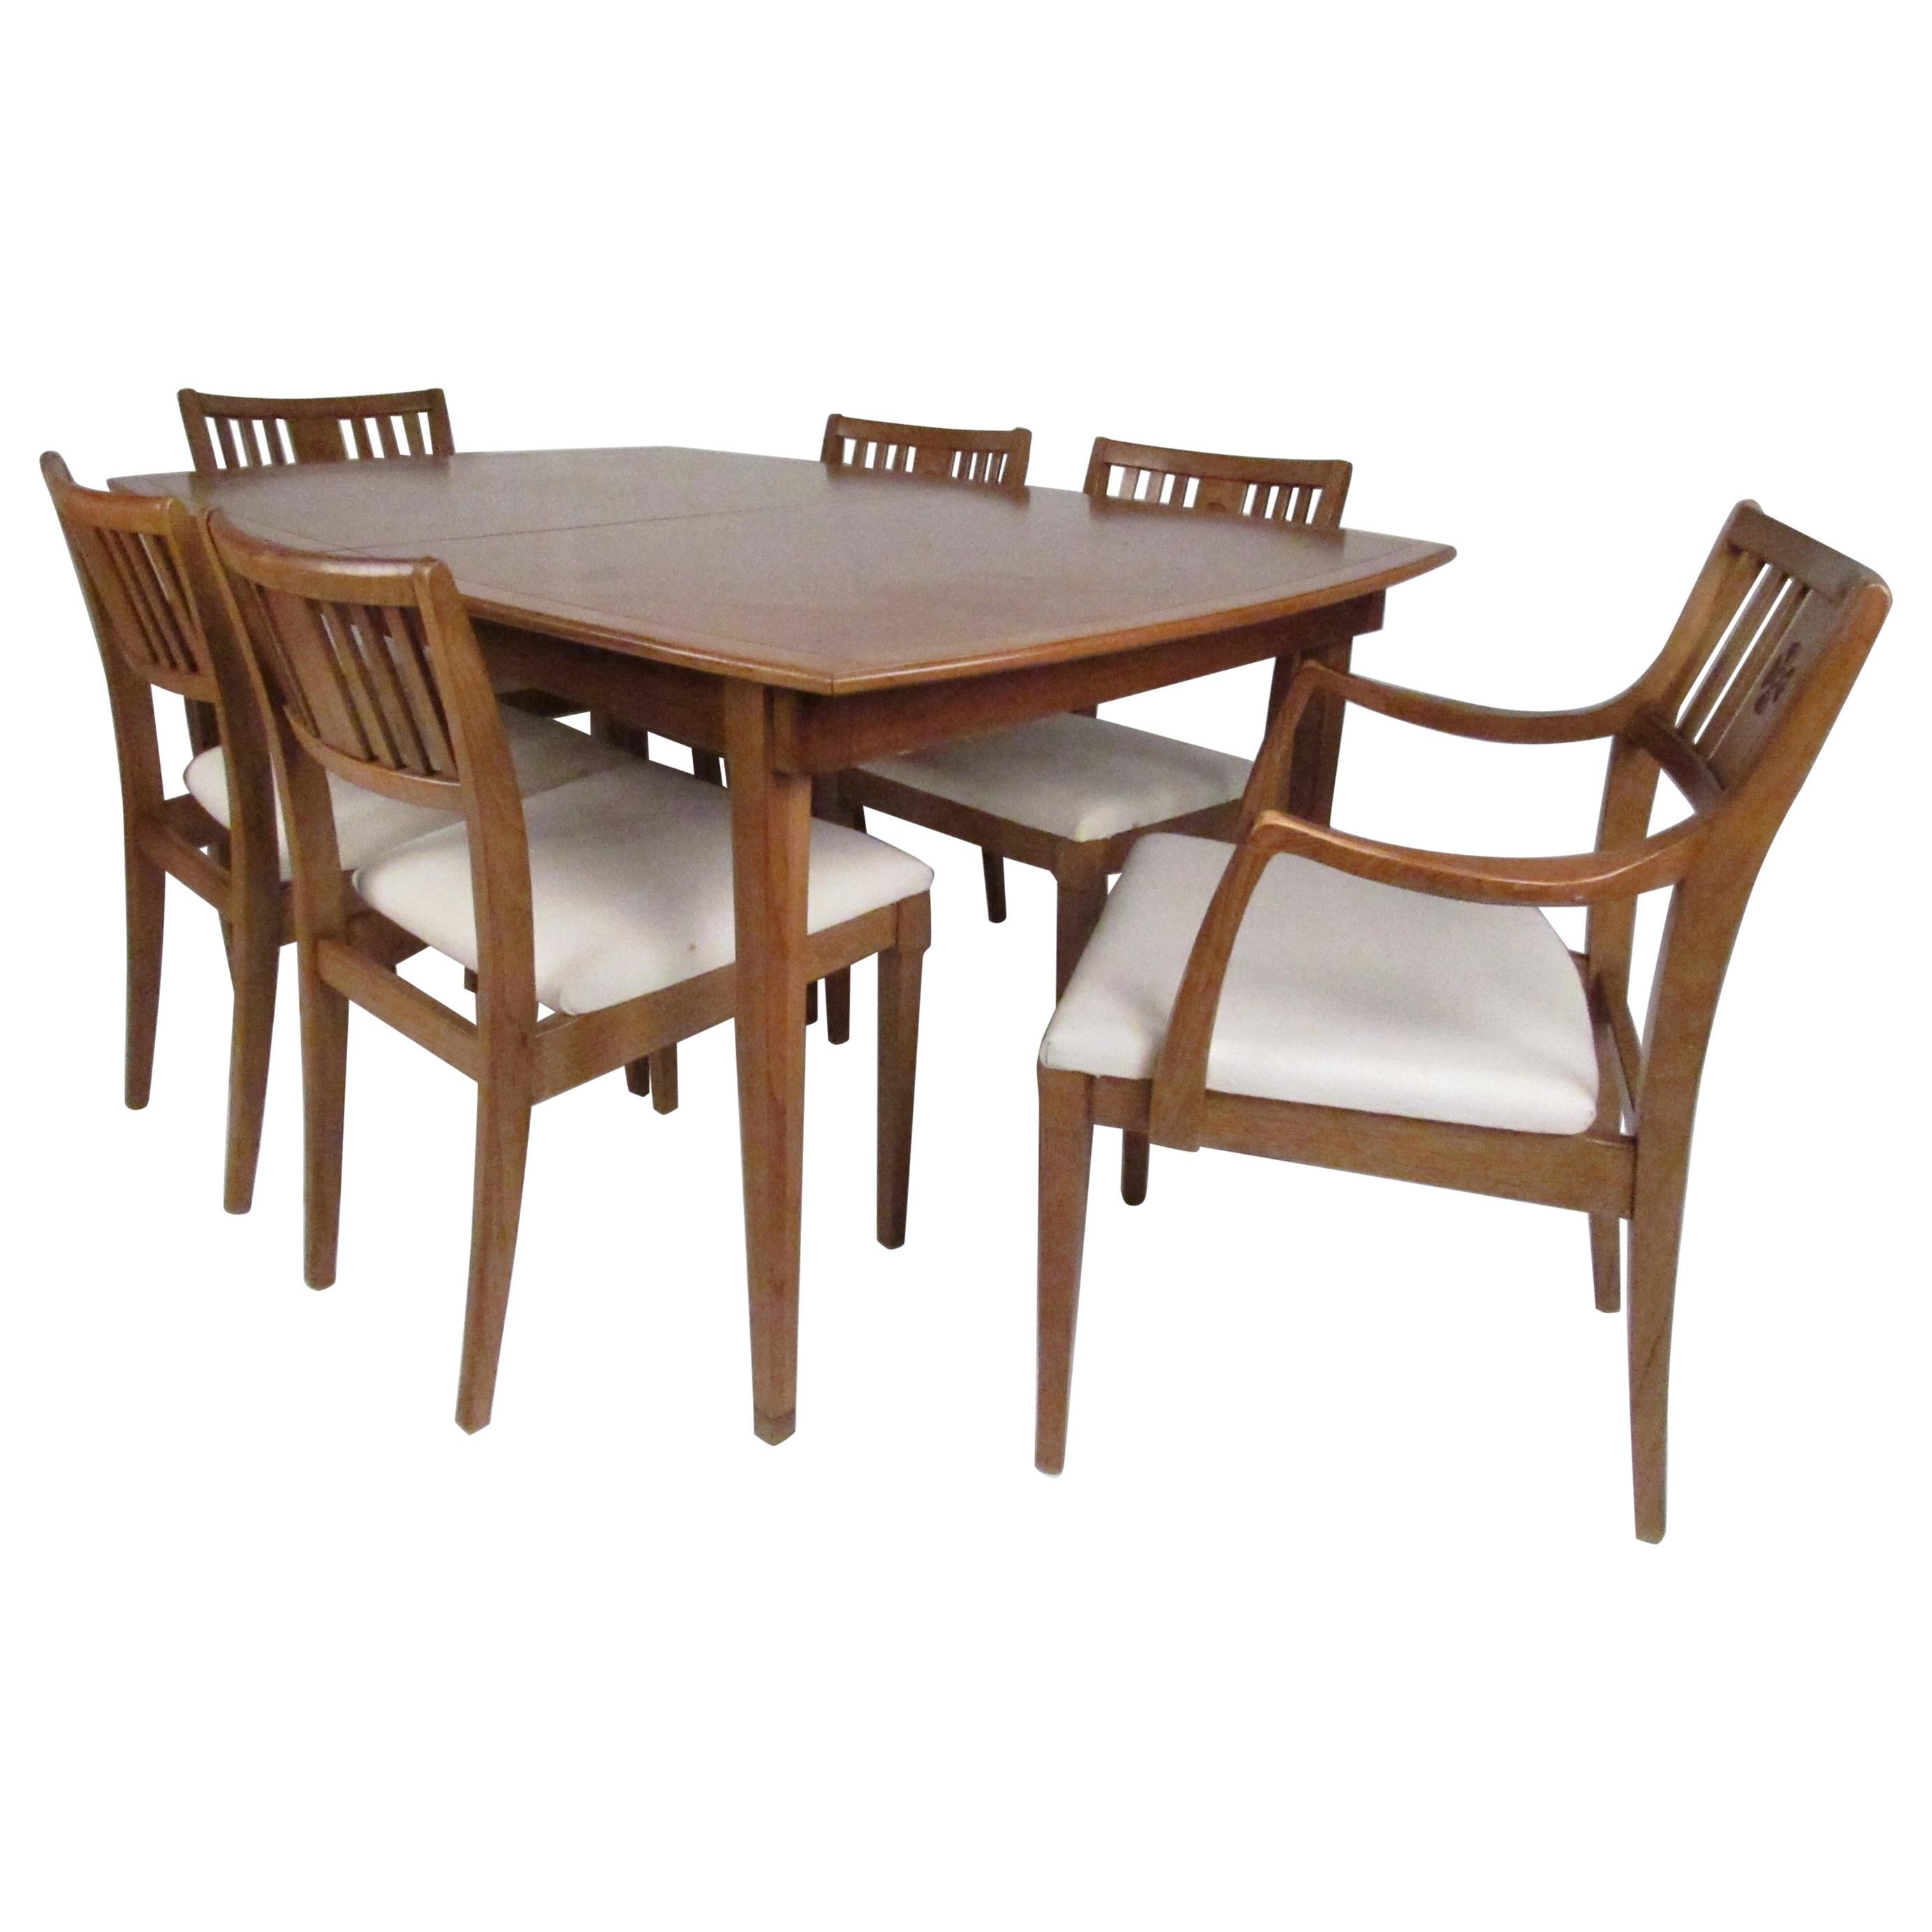 Midcentury "Artistry" Dining Table and Chairs by Drexel